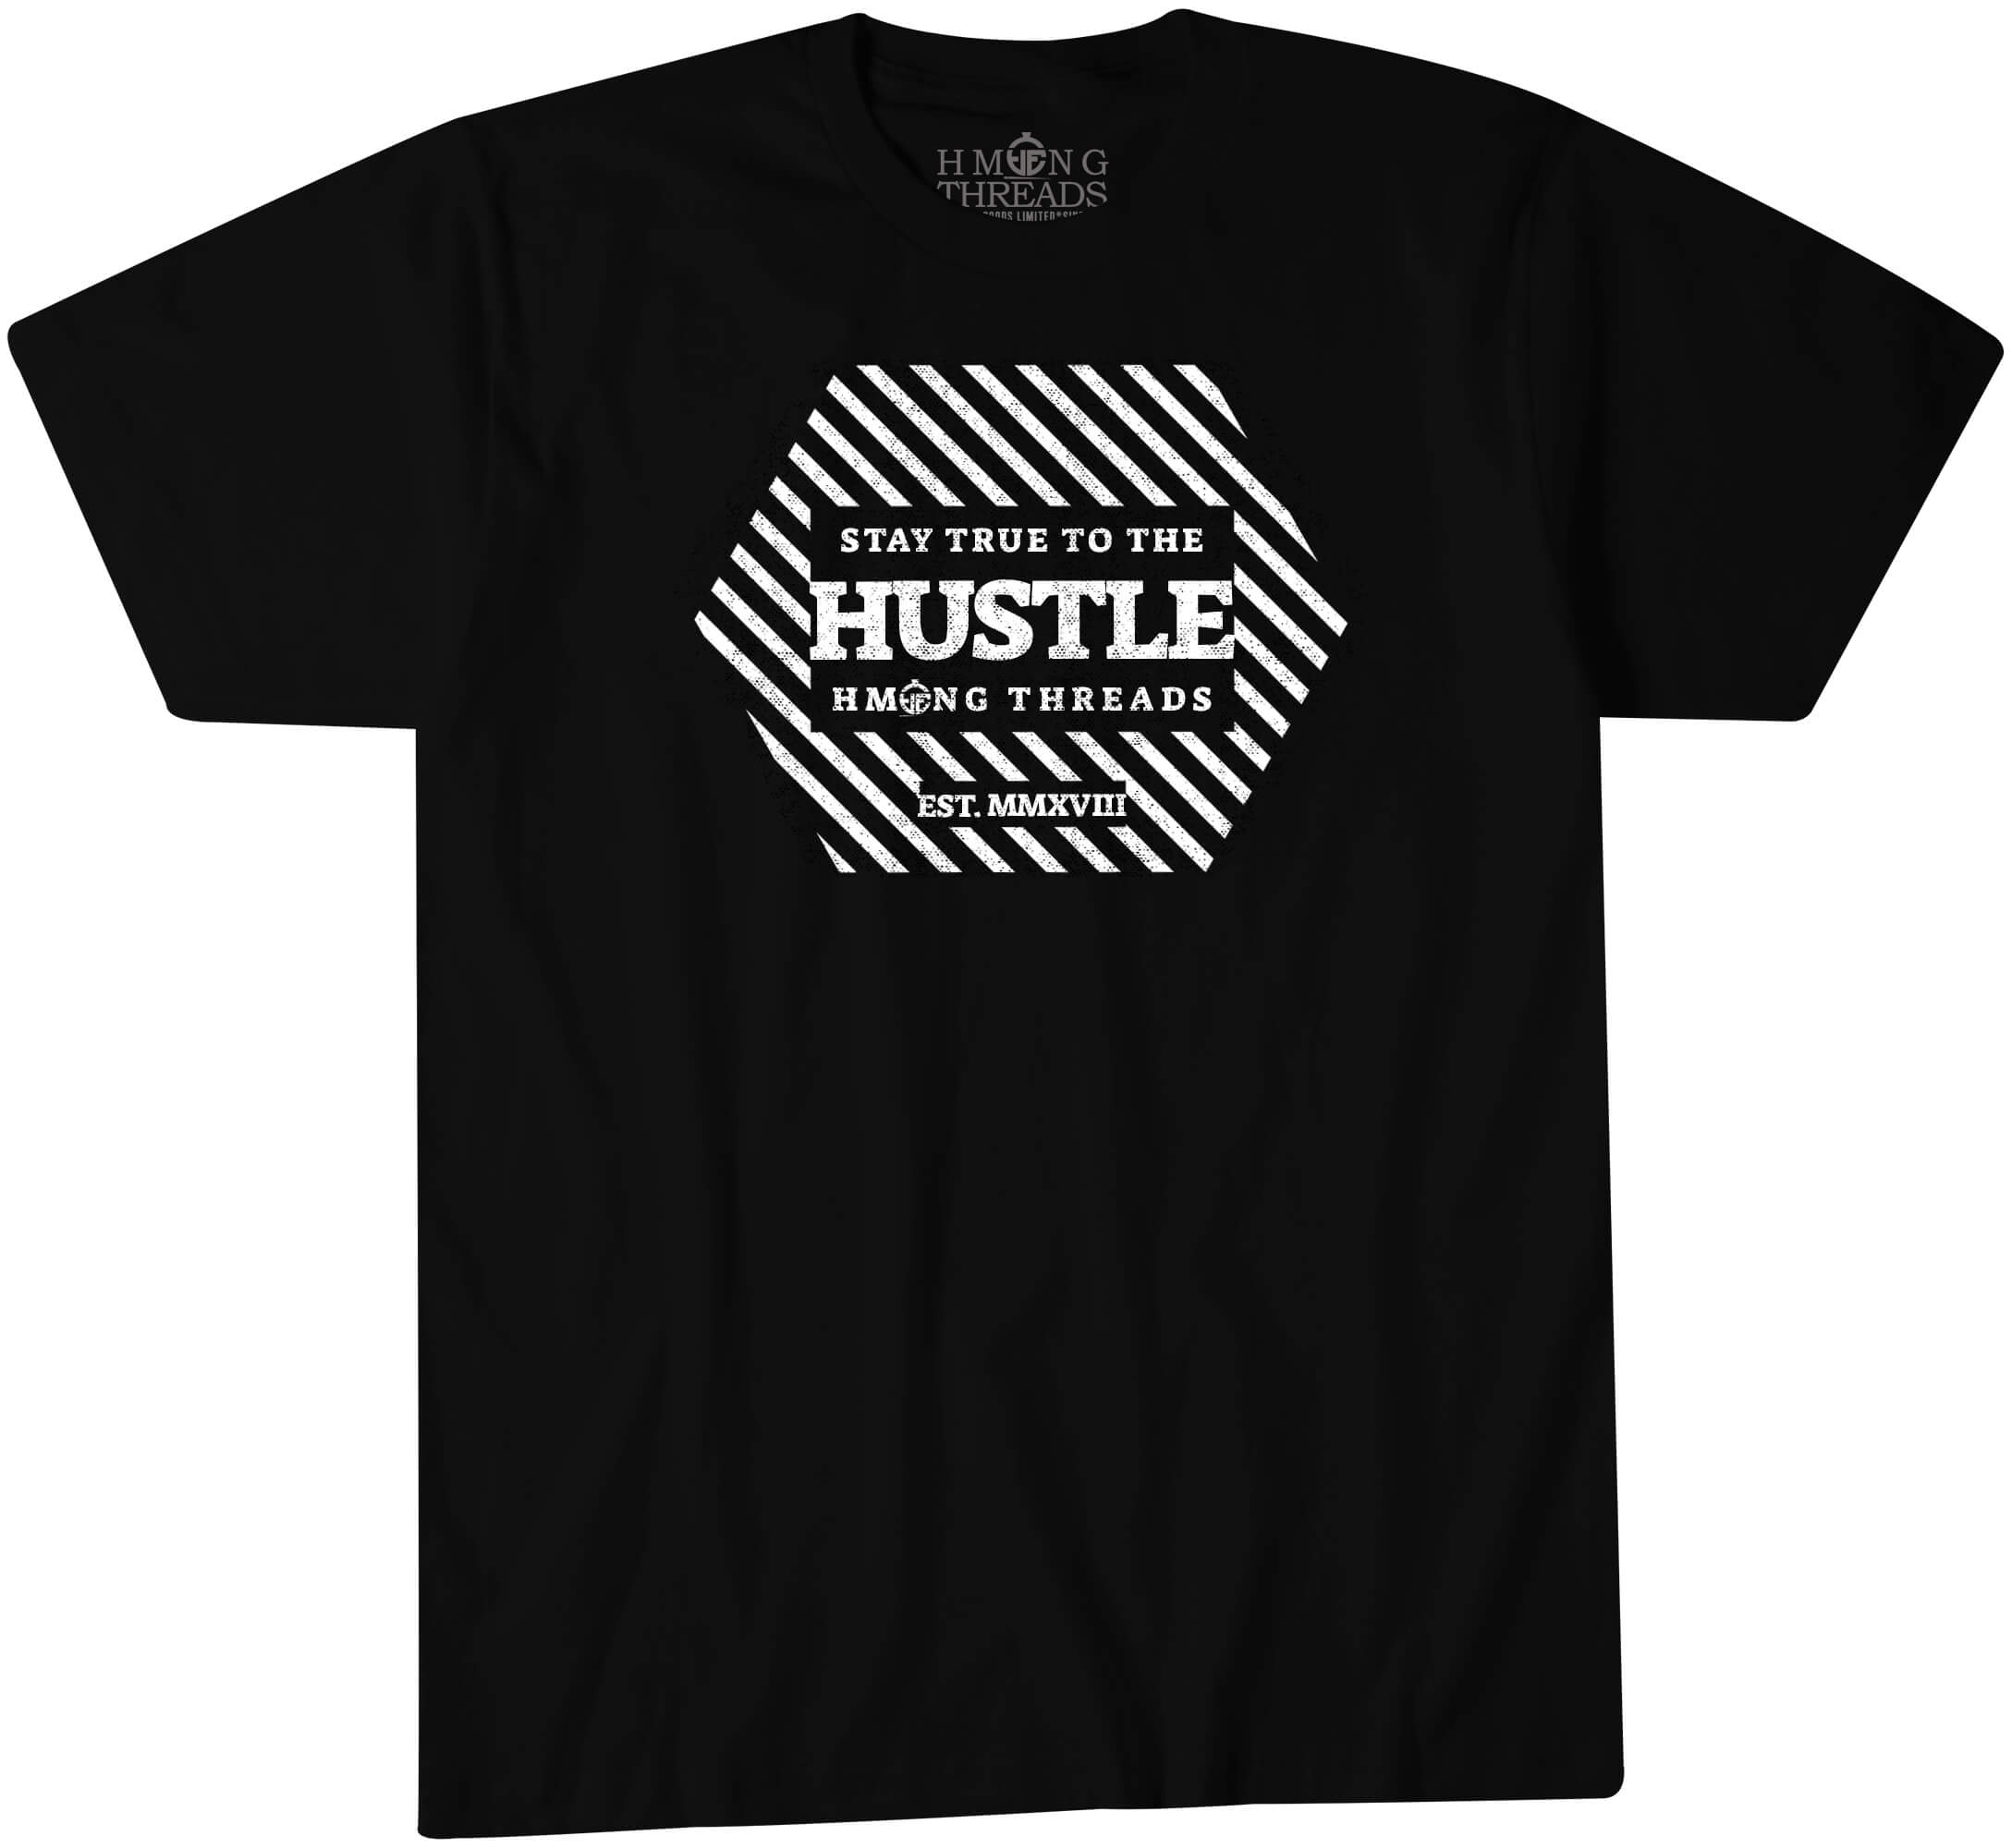 Stay True to the Hustle Black Color T-Shirt - HMONG THREADS